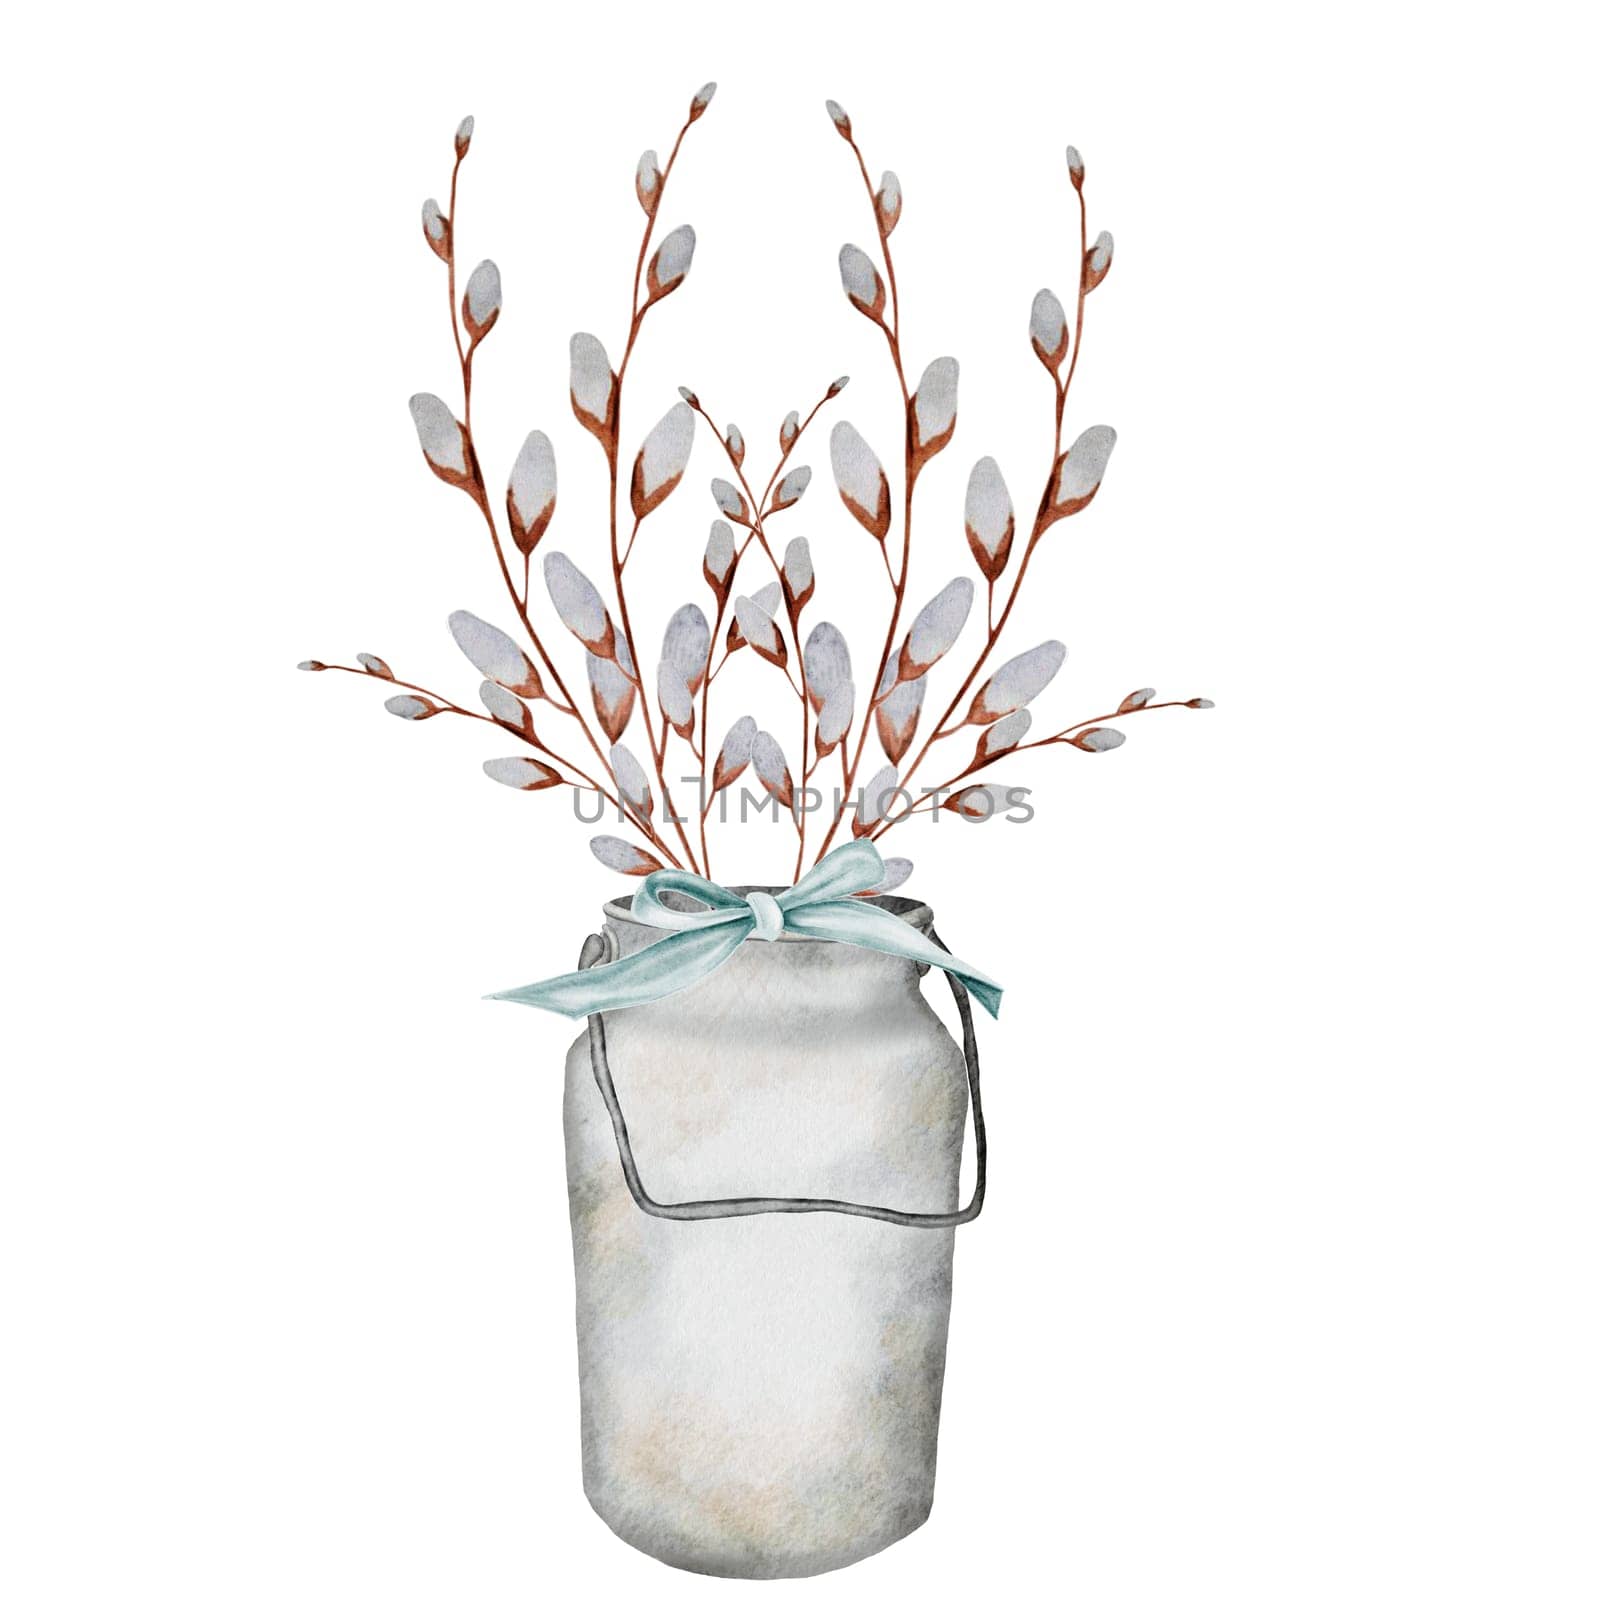 Willow watercolor hand drawing. A bouquet of branches with a blue bow in a metal milk can. Clip art of a festive composition isolated on a white background. Ideal for invitations and cards for Easter, Thanksgiving. High quality illustration